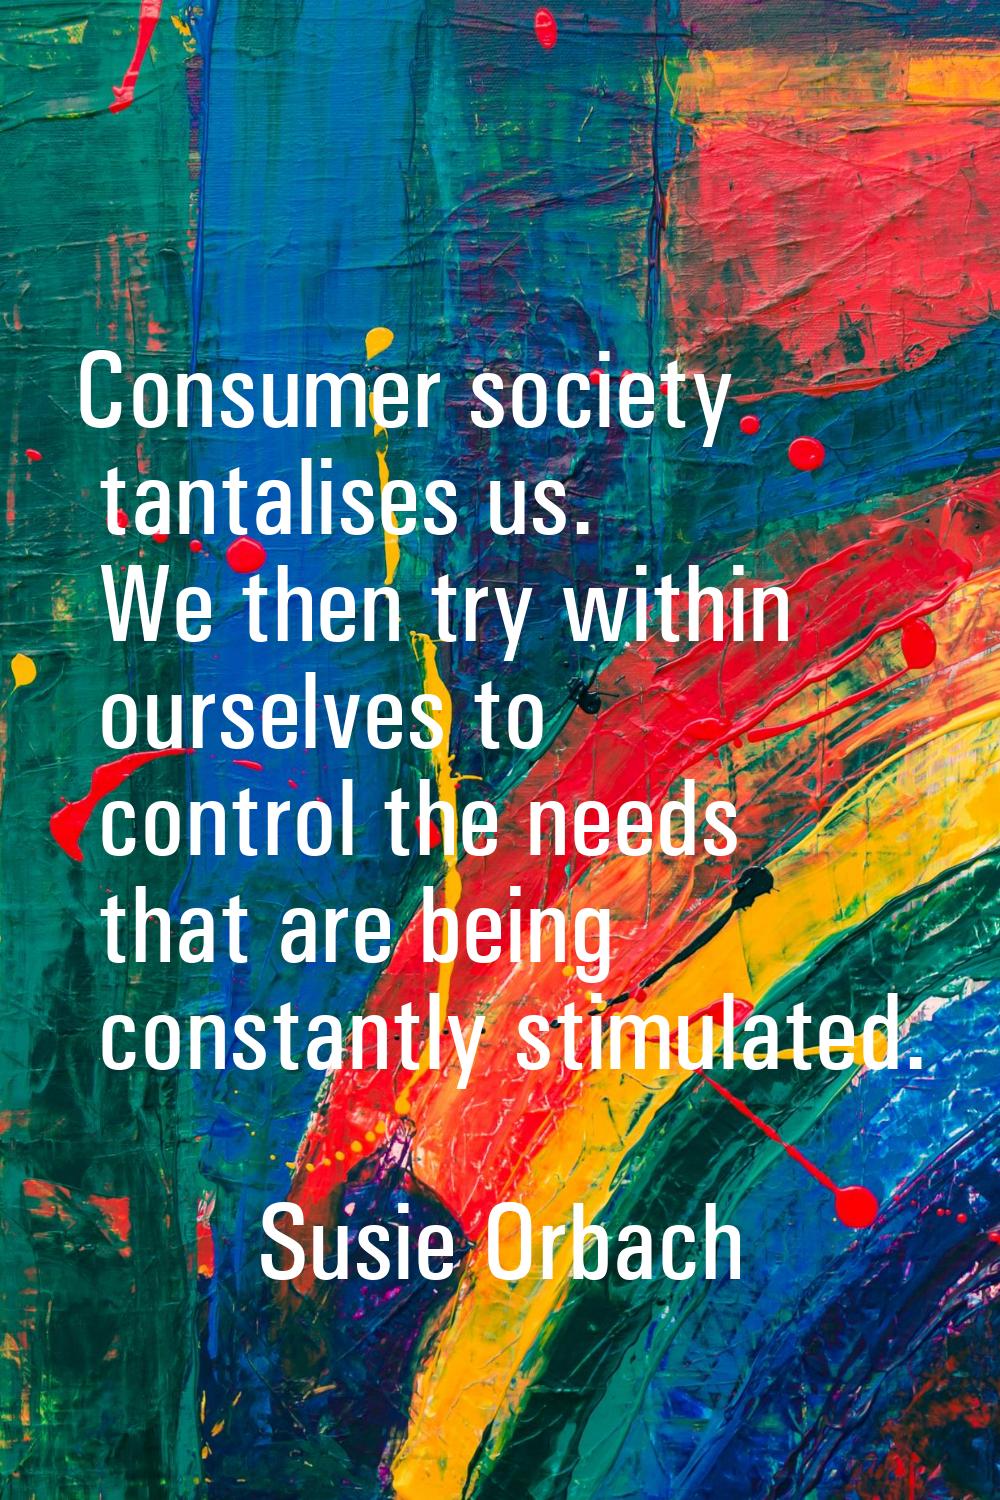 Consumer society tantalises us. We then try within ourselves to control the needs that are being co